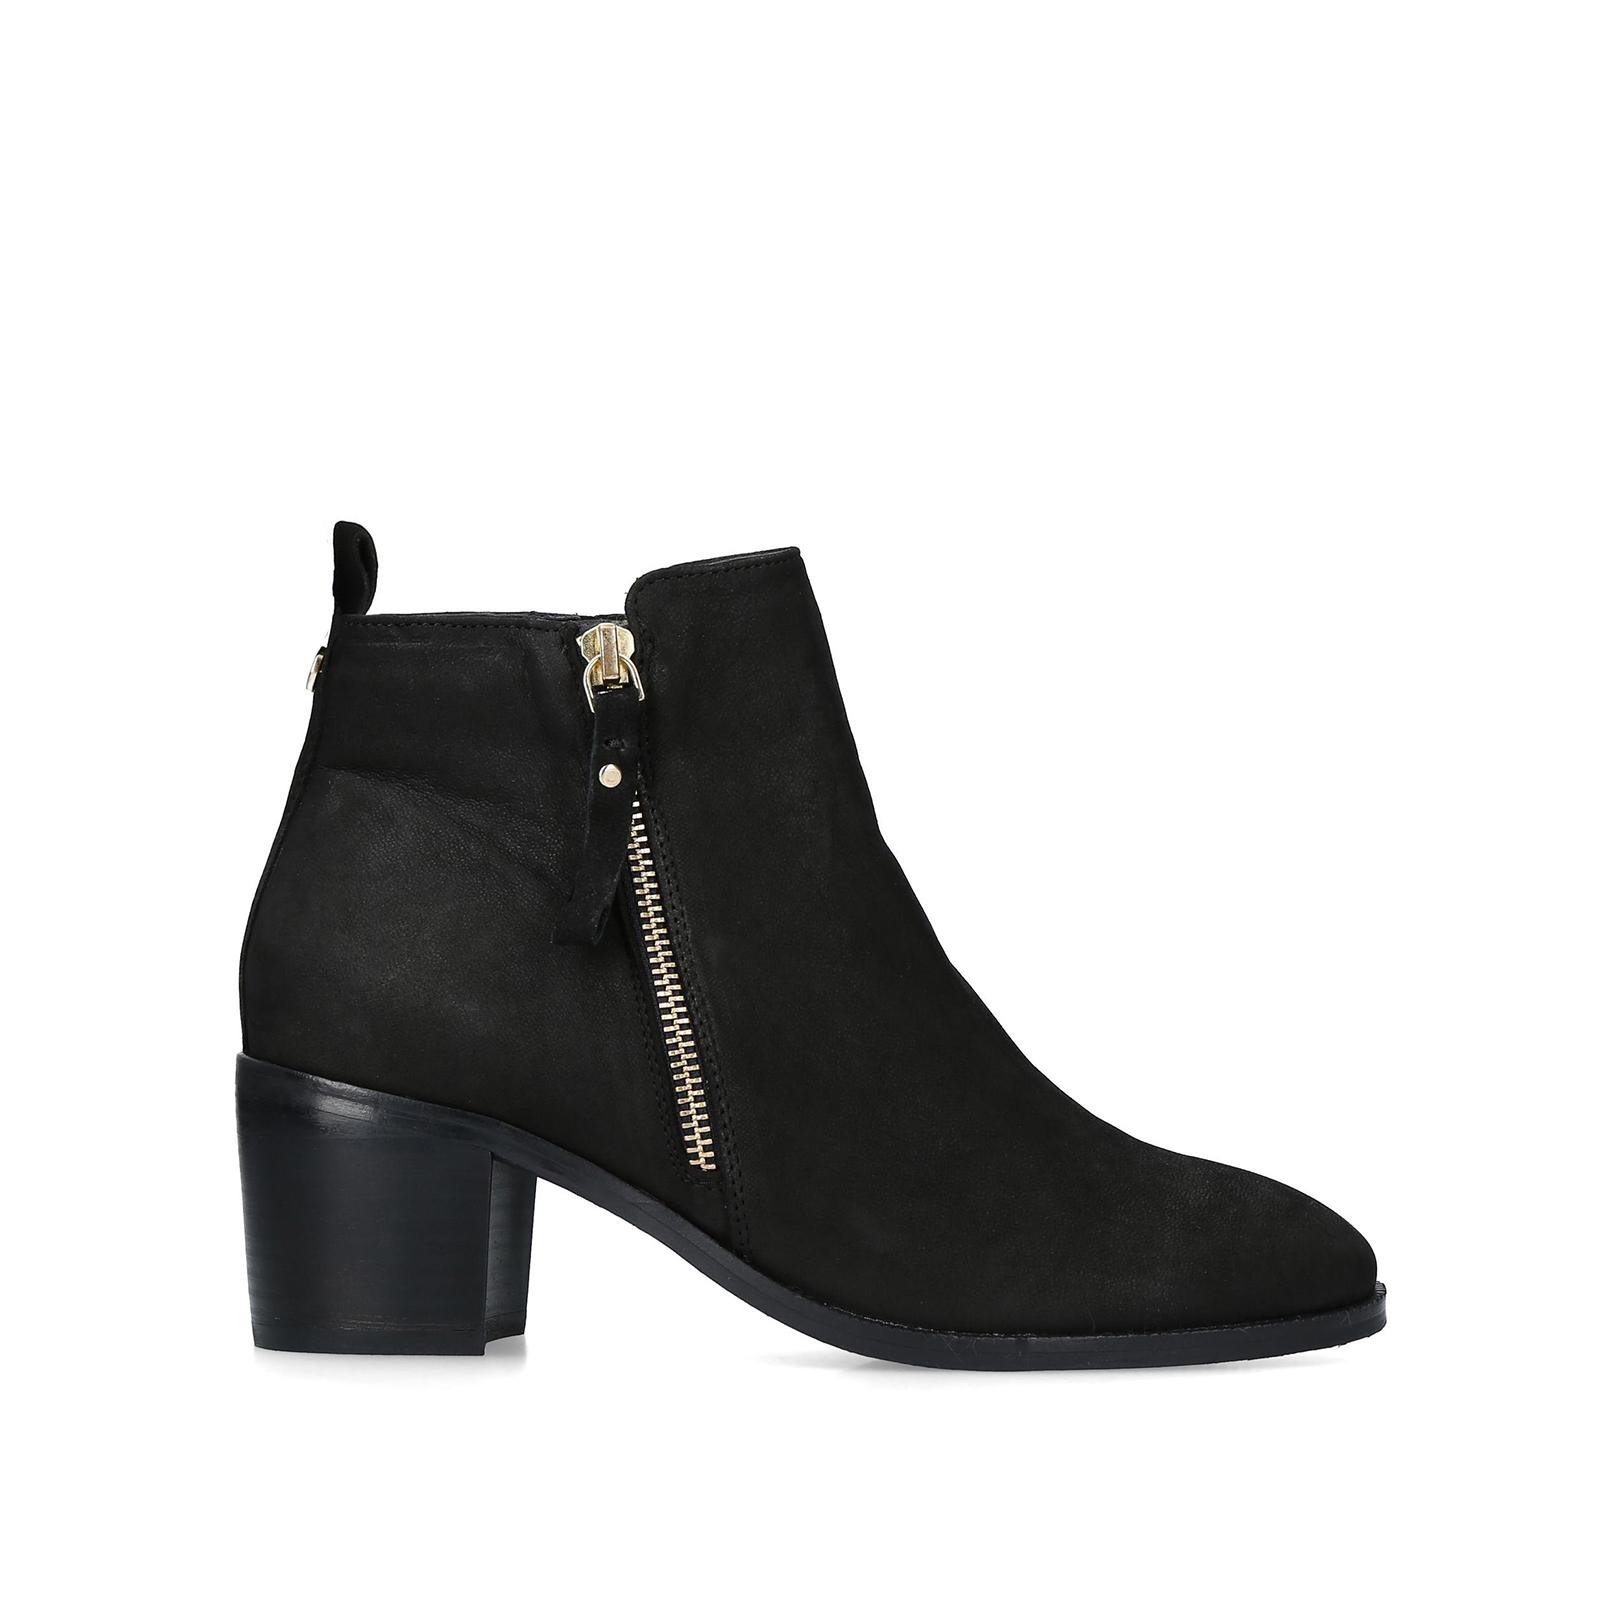 CHARM - NINE WEST Ankle Boots